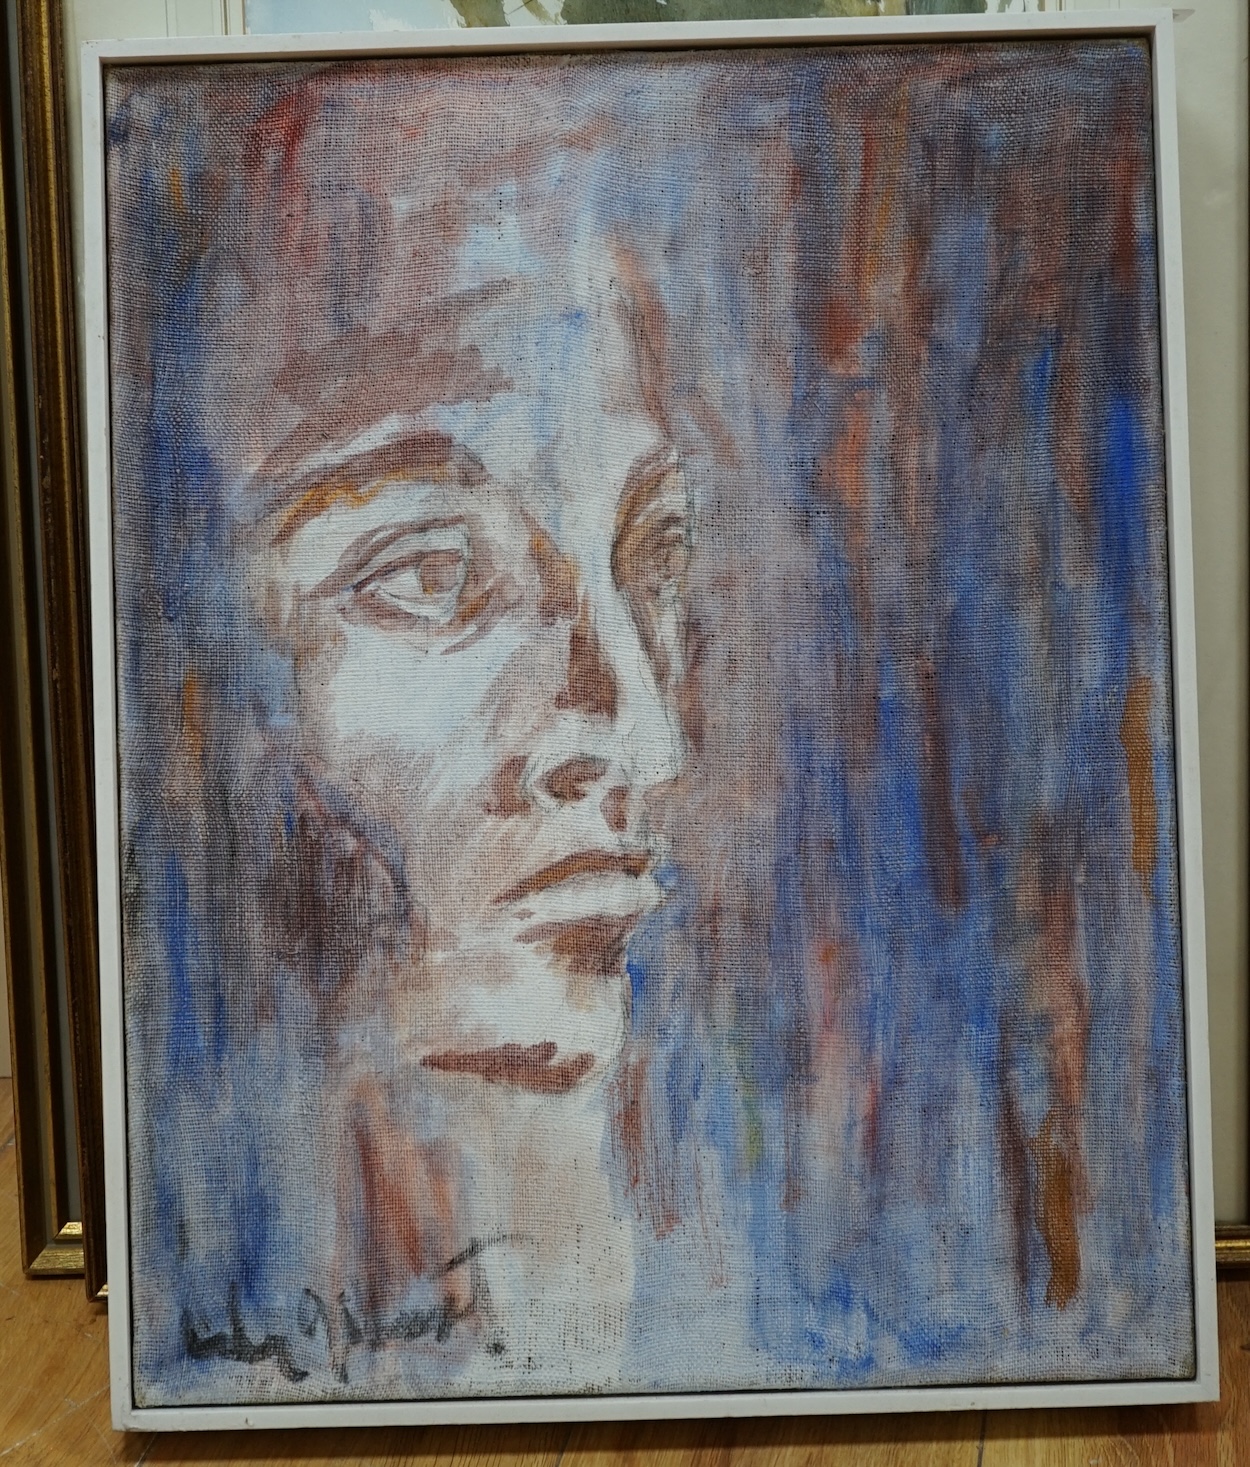 20th century School, oil on canvas, Head study, indistinctly signed, 52 x 41cm. Condition - good